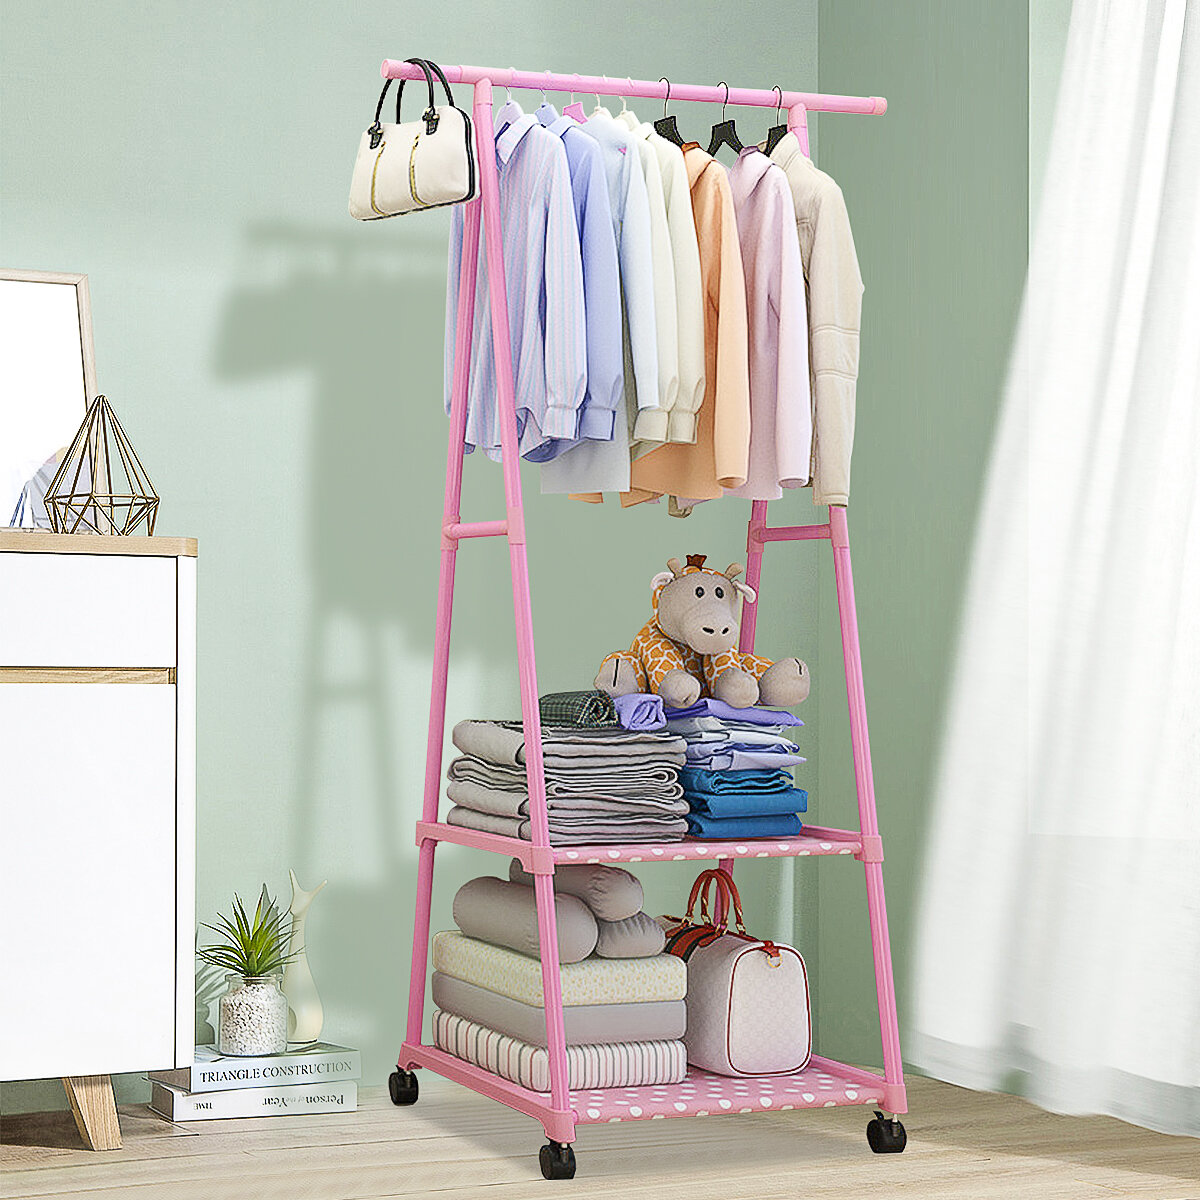 

Movable Multi-layer Clothes Hanger Strong Bearing Bedroom Clothes Rack Multifunctional Coat Rack Floor Hanger